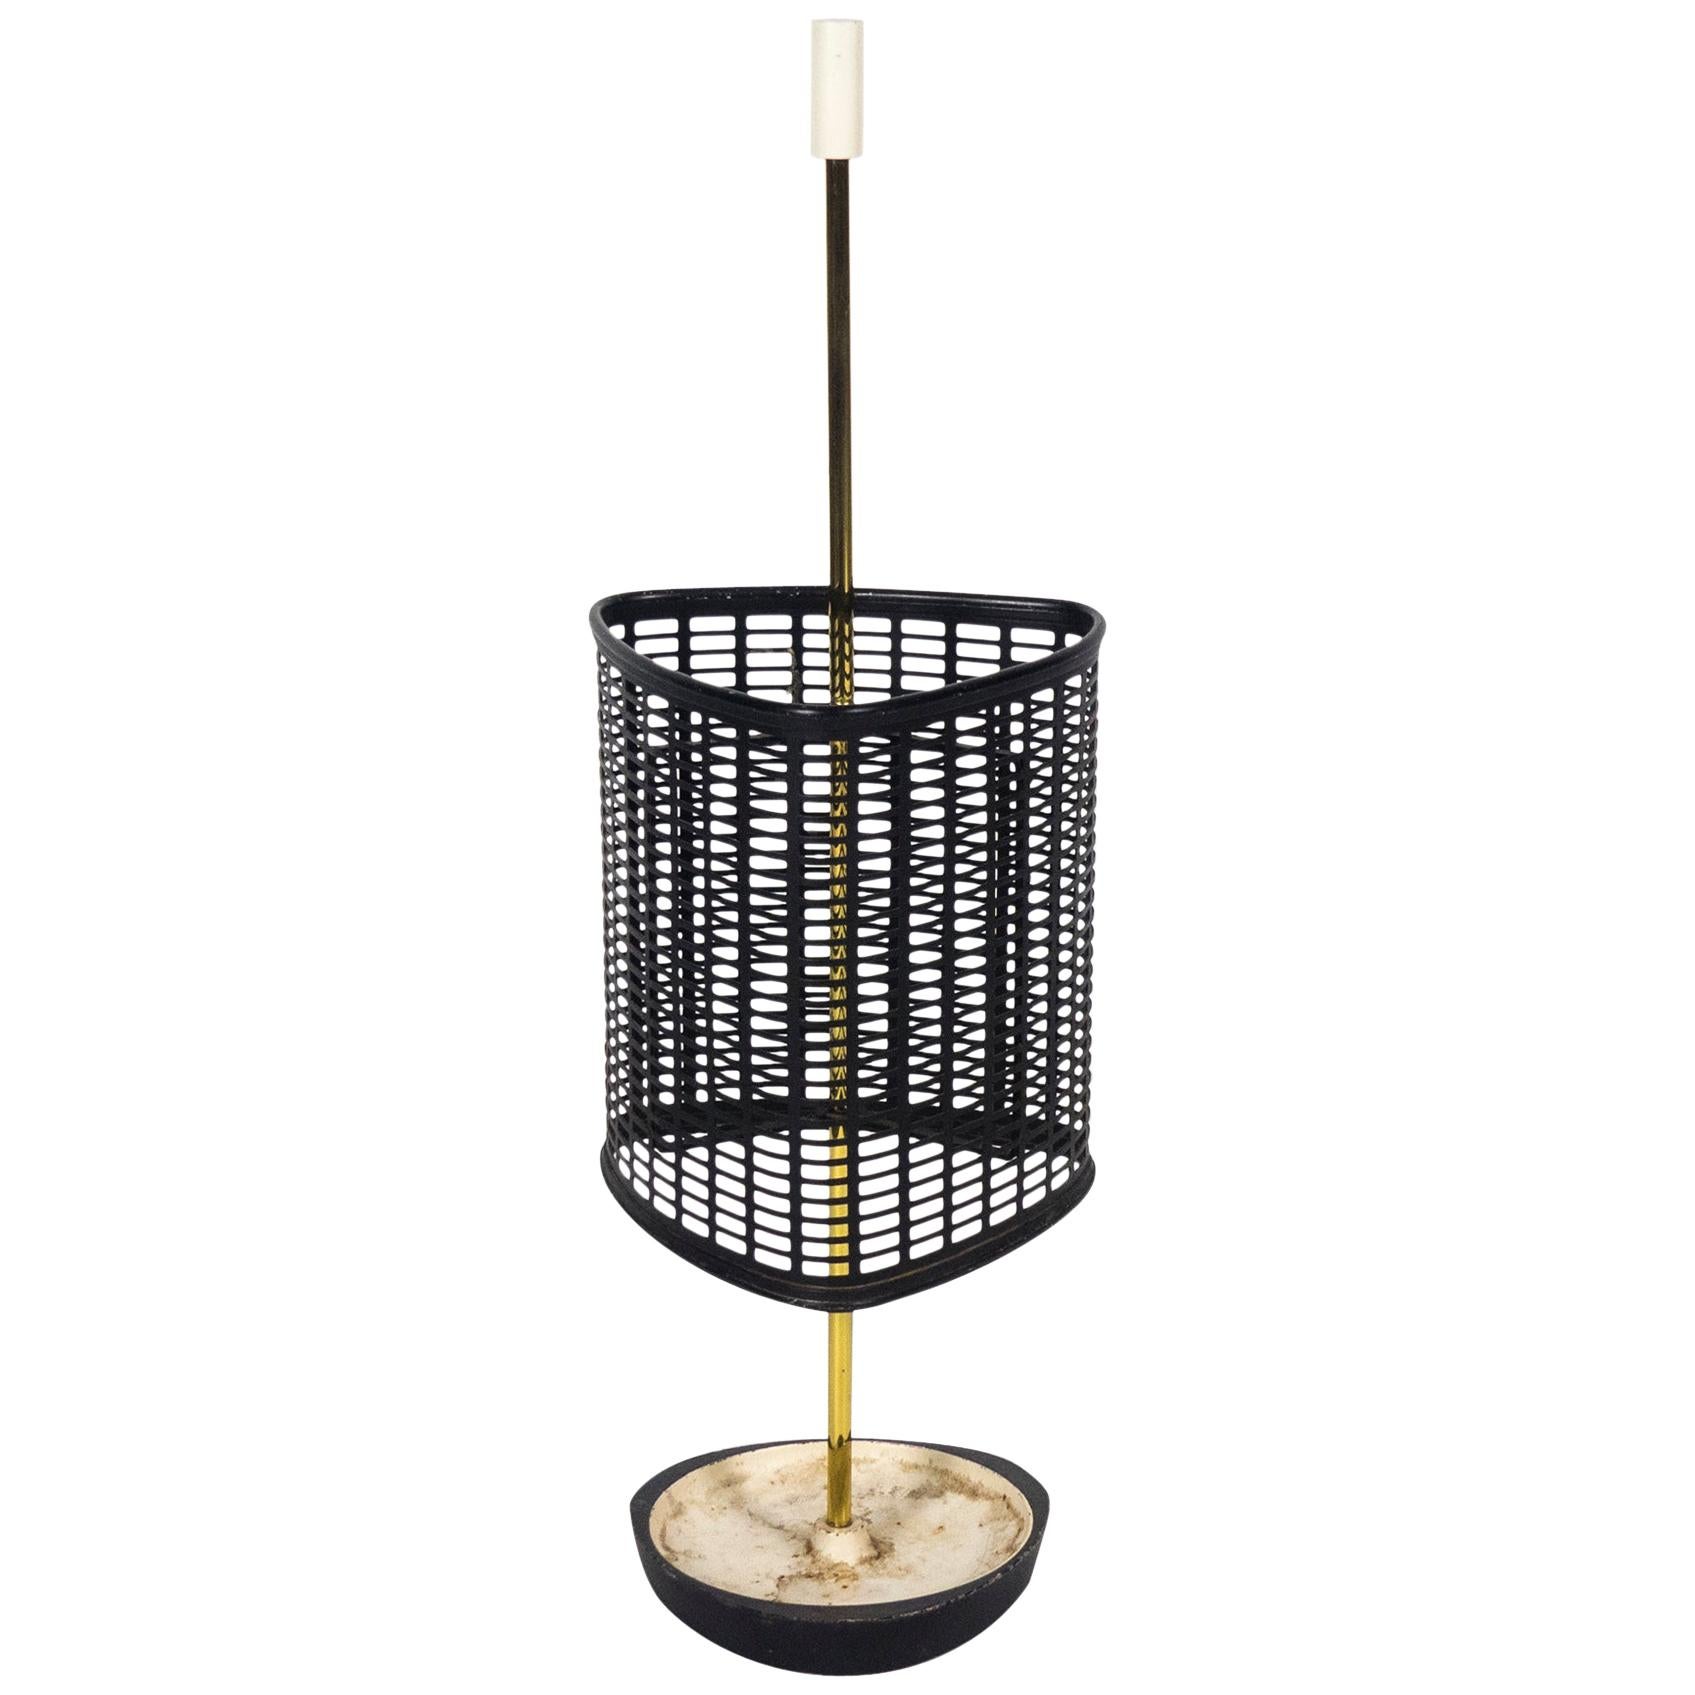 Midcentury Italian Brass and Perforated Metal Umbrella Stand, 1950s For Sale